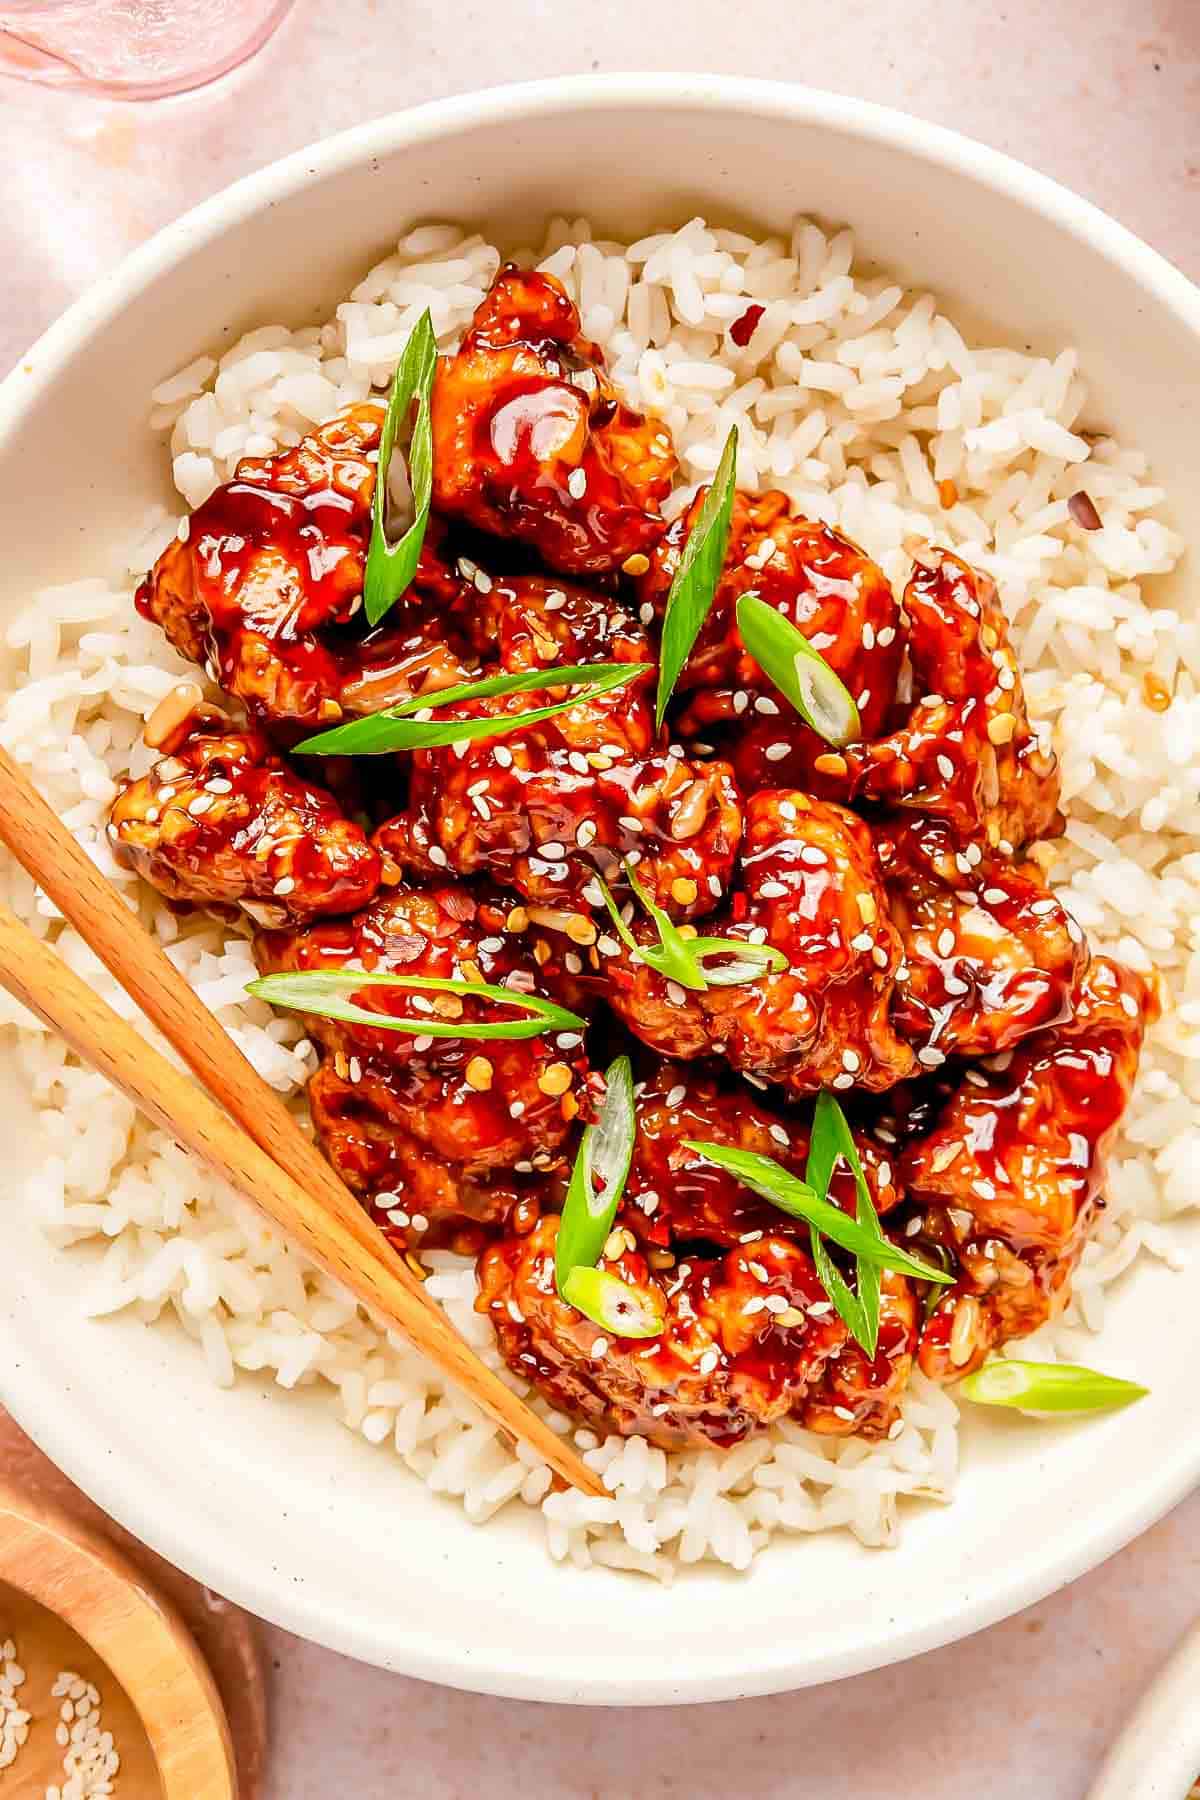 general tso's chicken on top of white rice in a bowl with wooden chopsticks. garnished with sesame seeds and scallions